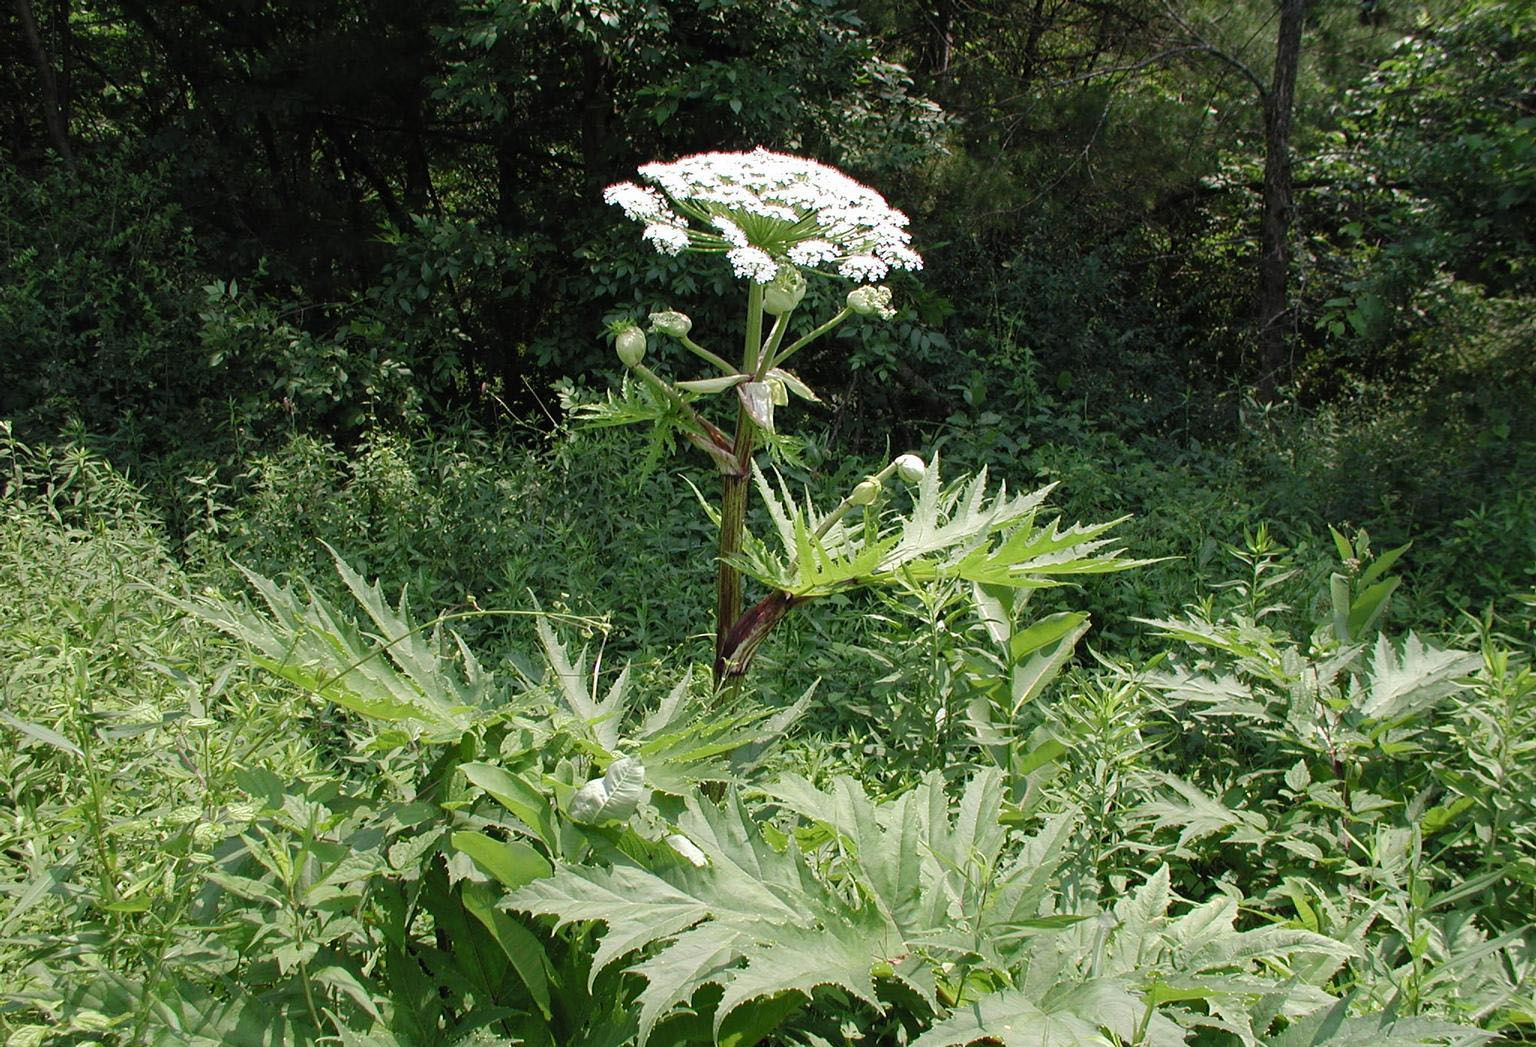 giant-hogweed-a-toxic-plant-you-need-to-know-about-in-va-wtop-news